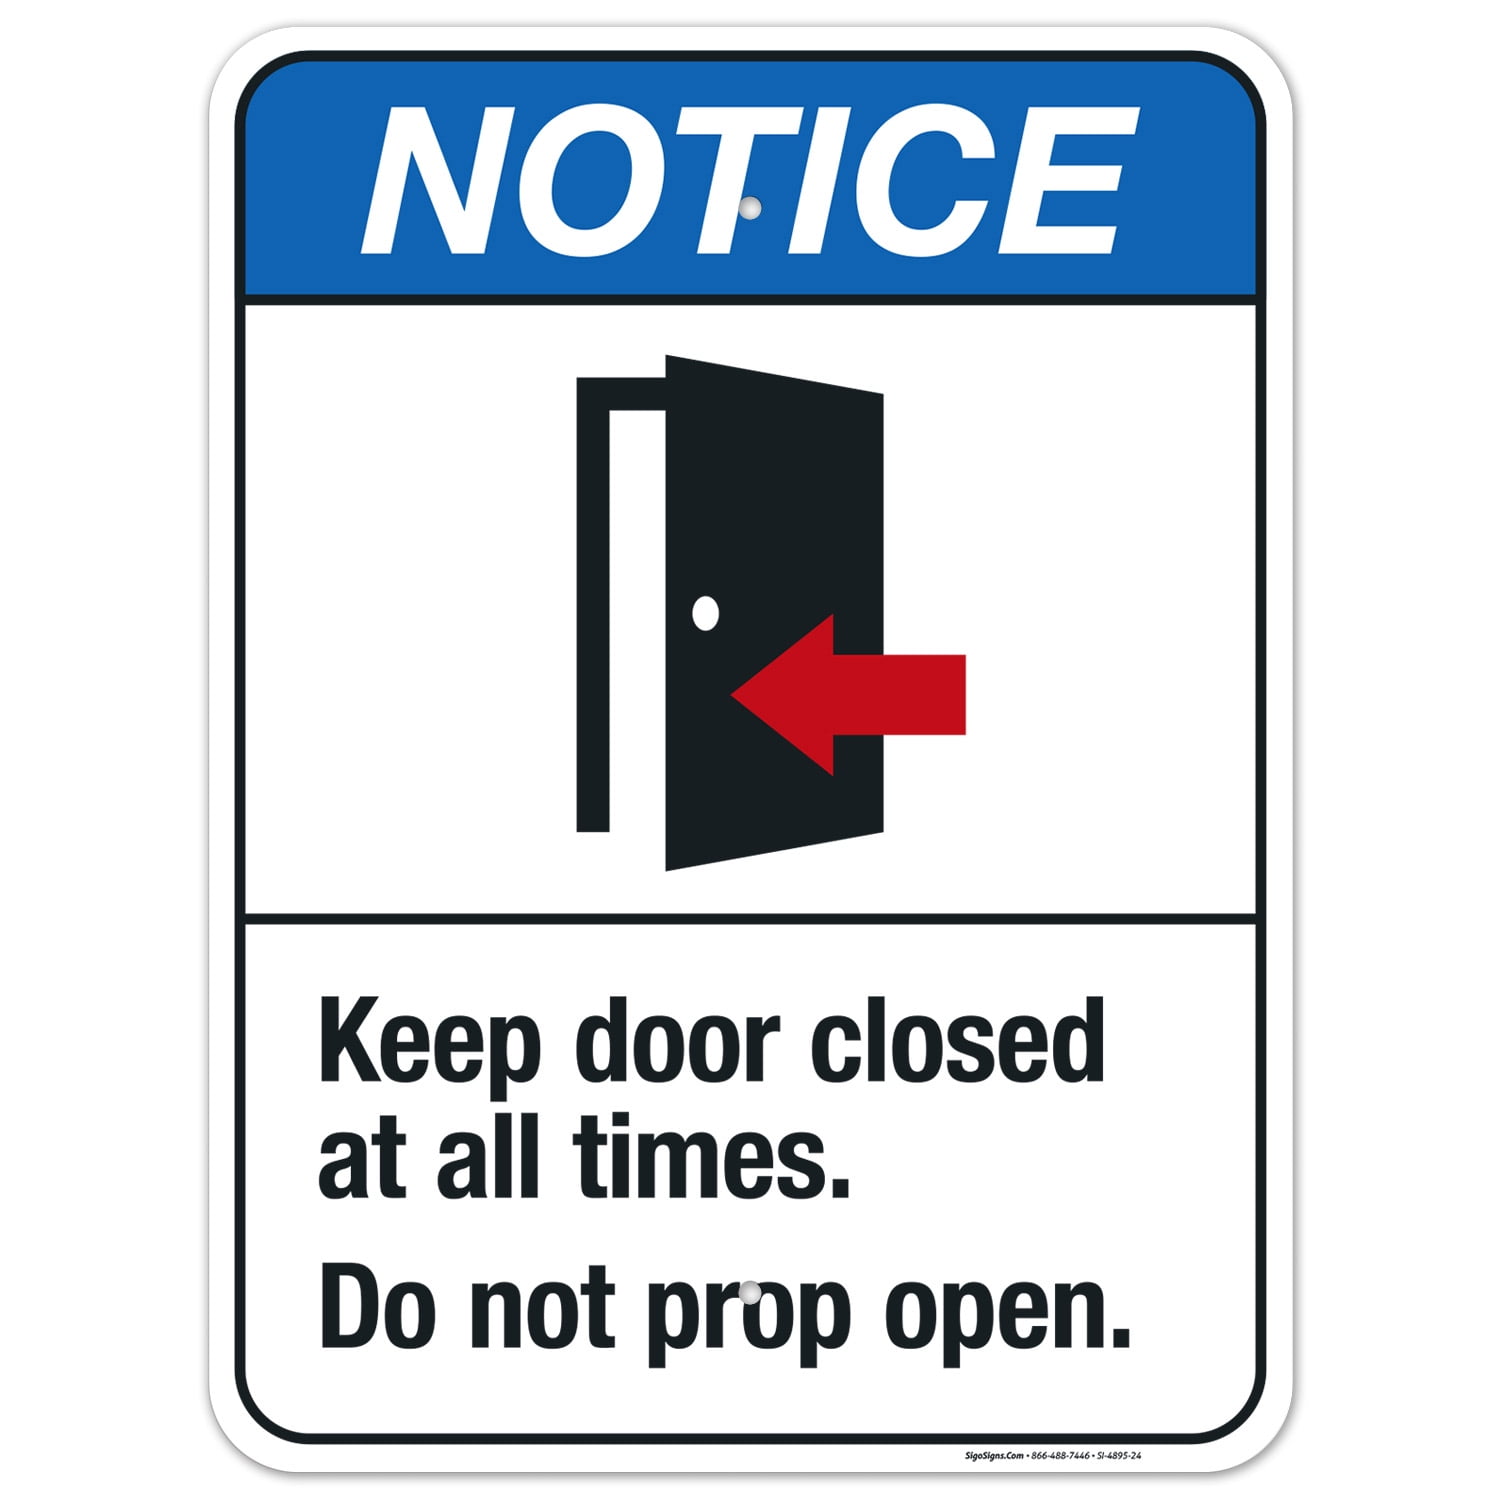 Stop the Prop: propped open doors present a security risk